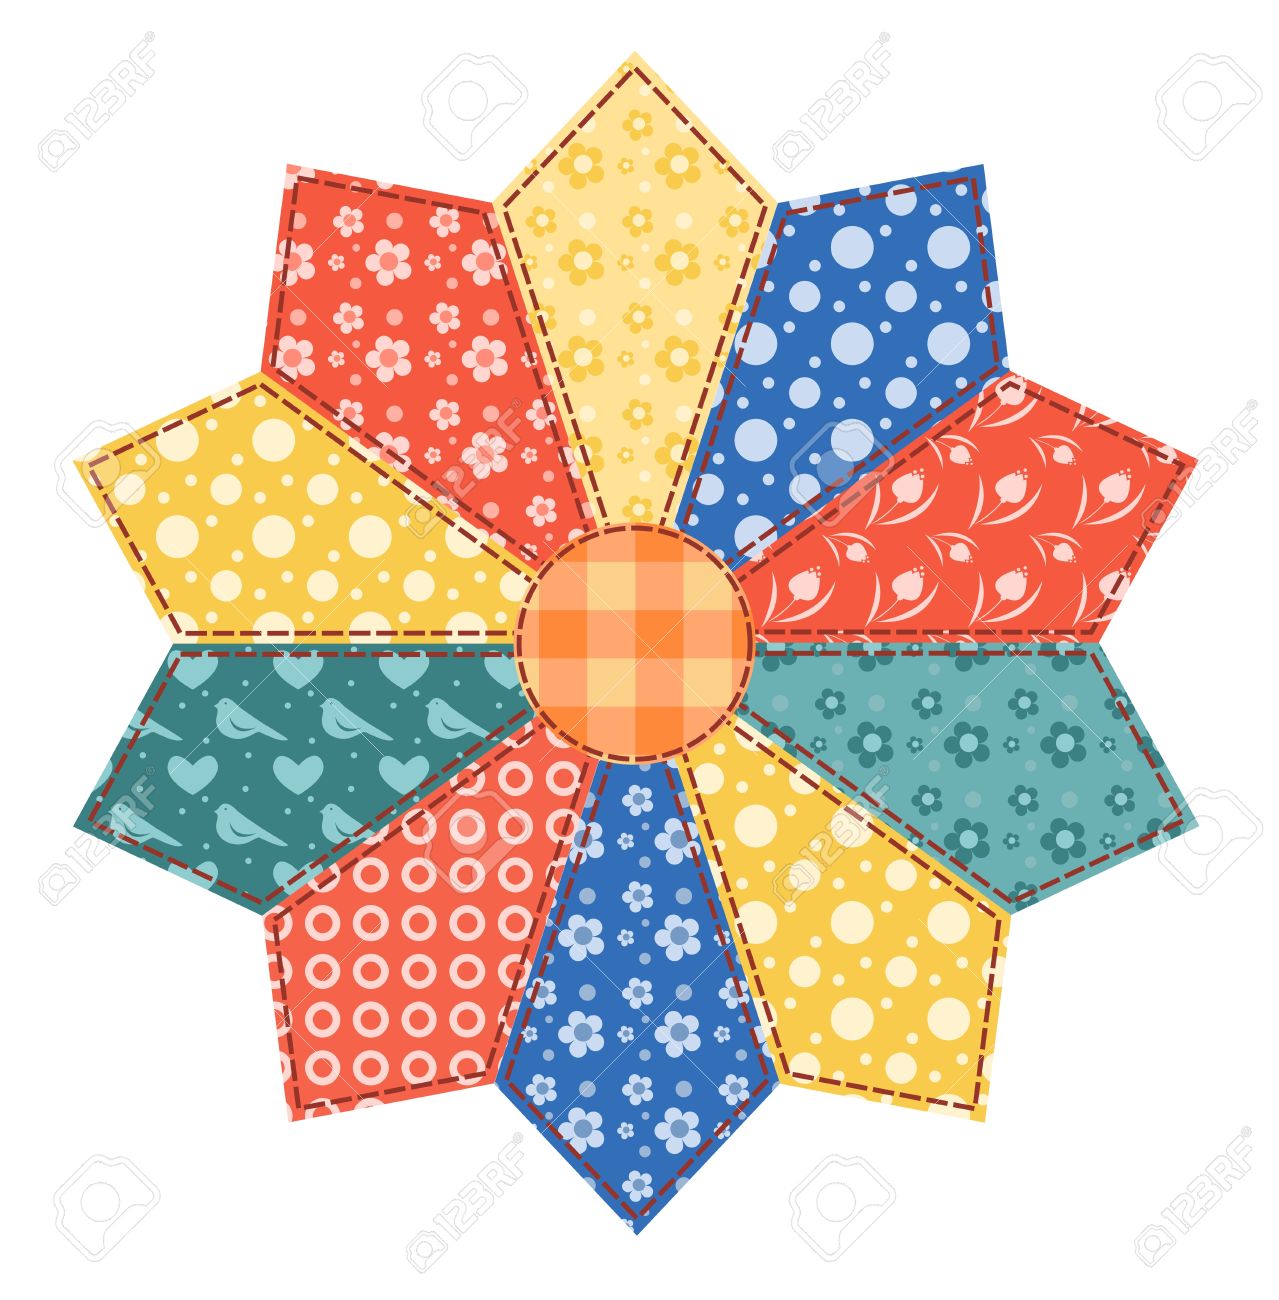 Patchwork free download best. Quilting clipart quilt patch